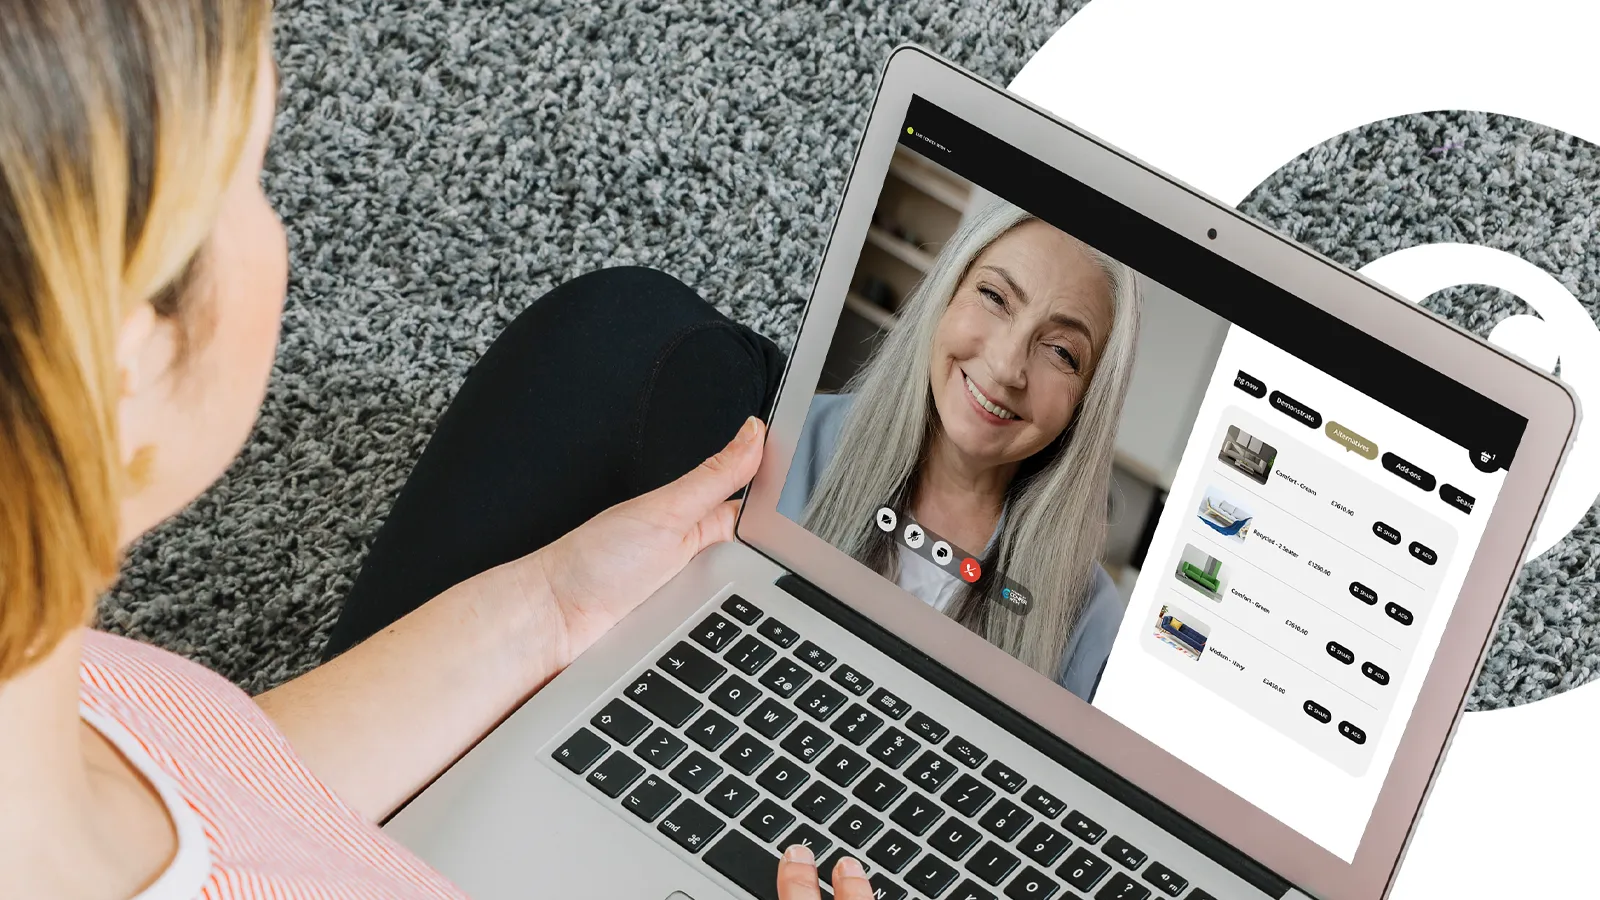 The Necessity of Personalized Recommendations in the Future of eCommerce and Live Video